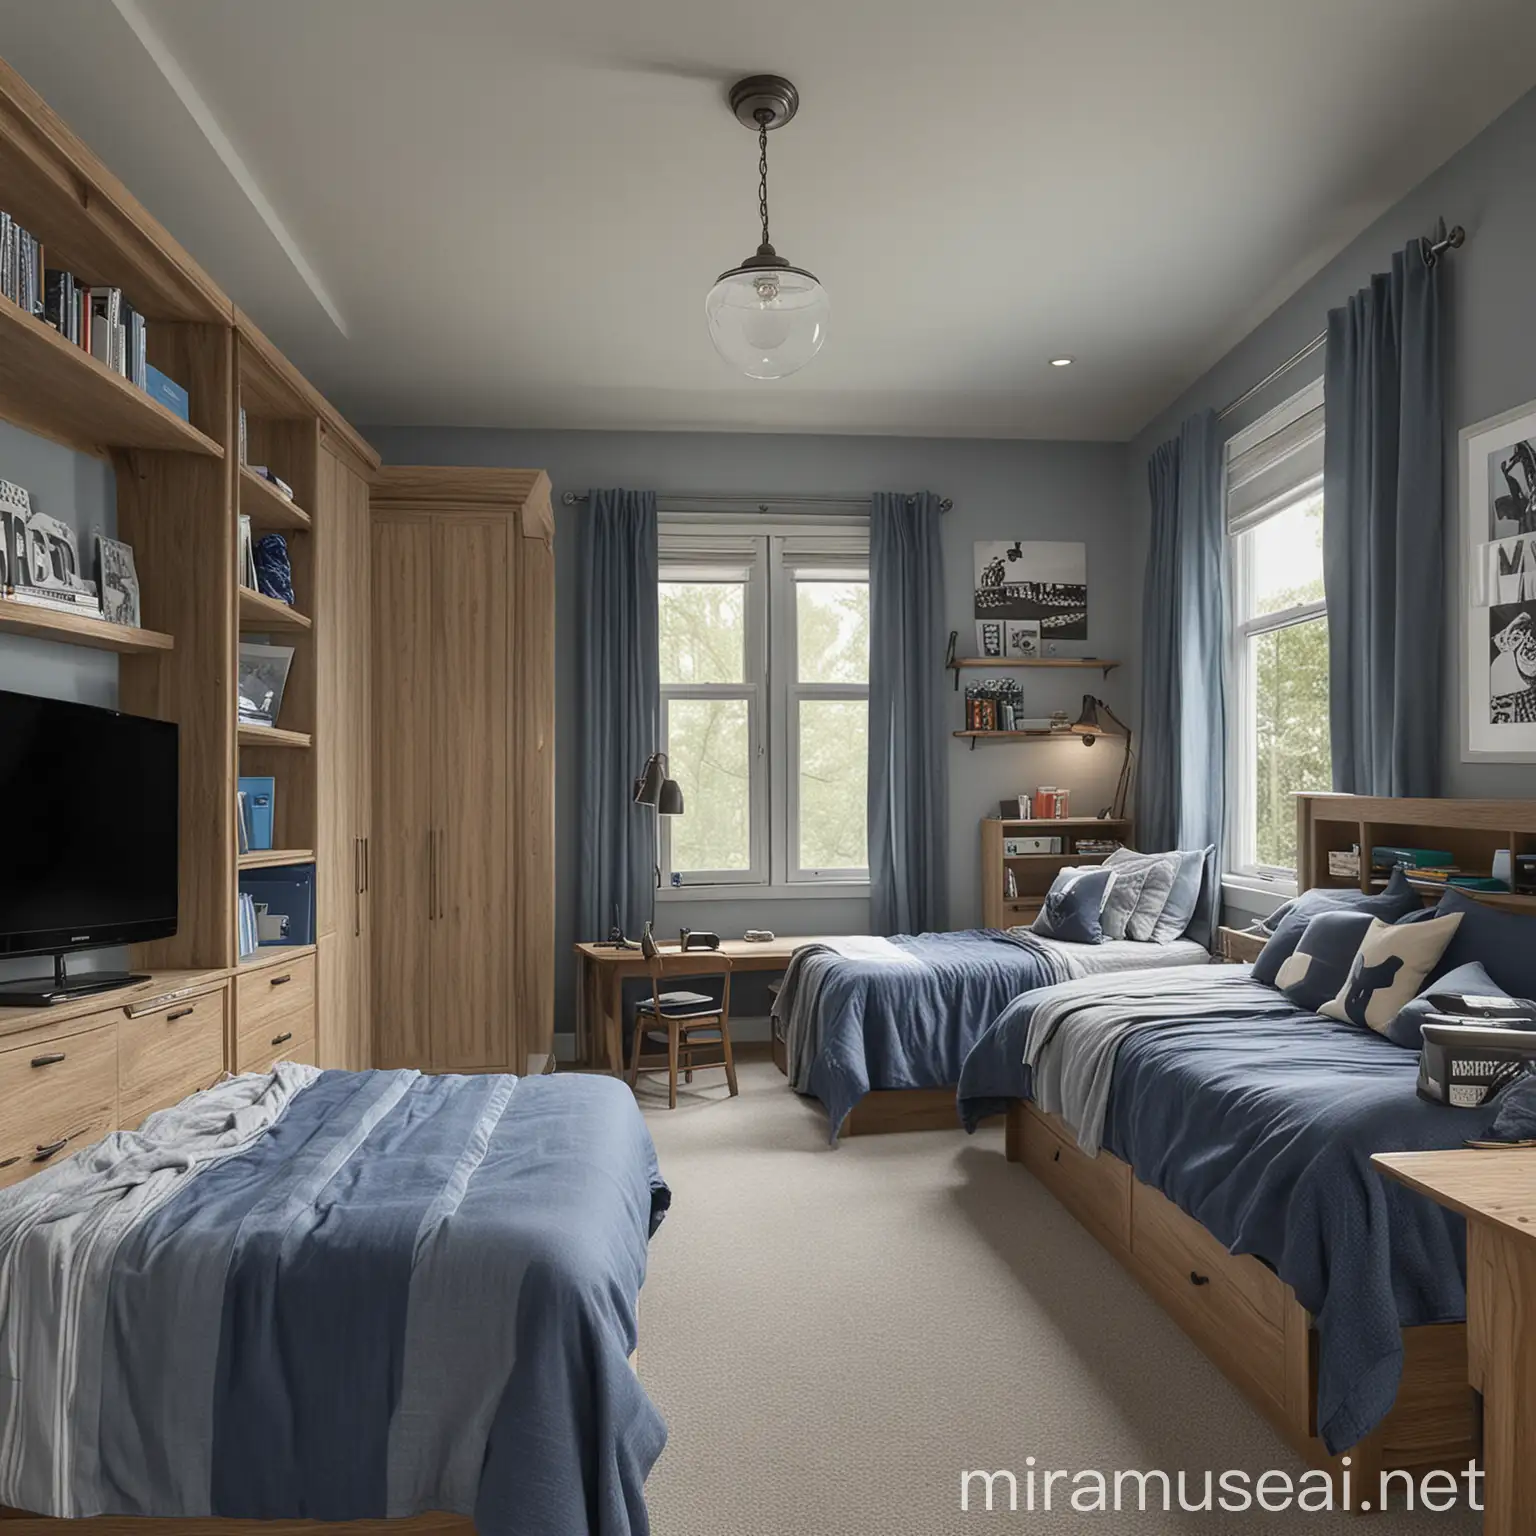 A boys bedroom, with two twin beds, desks for homework, wood wardrobe and a tv
also teamed with the colors grey and blue
